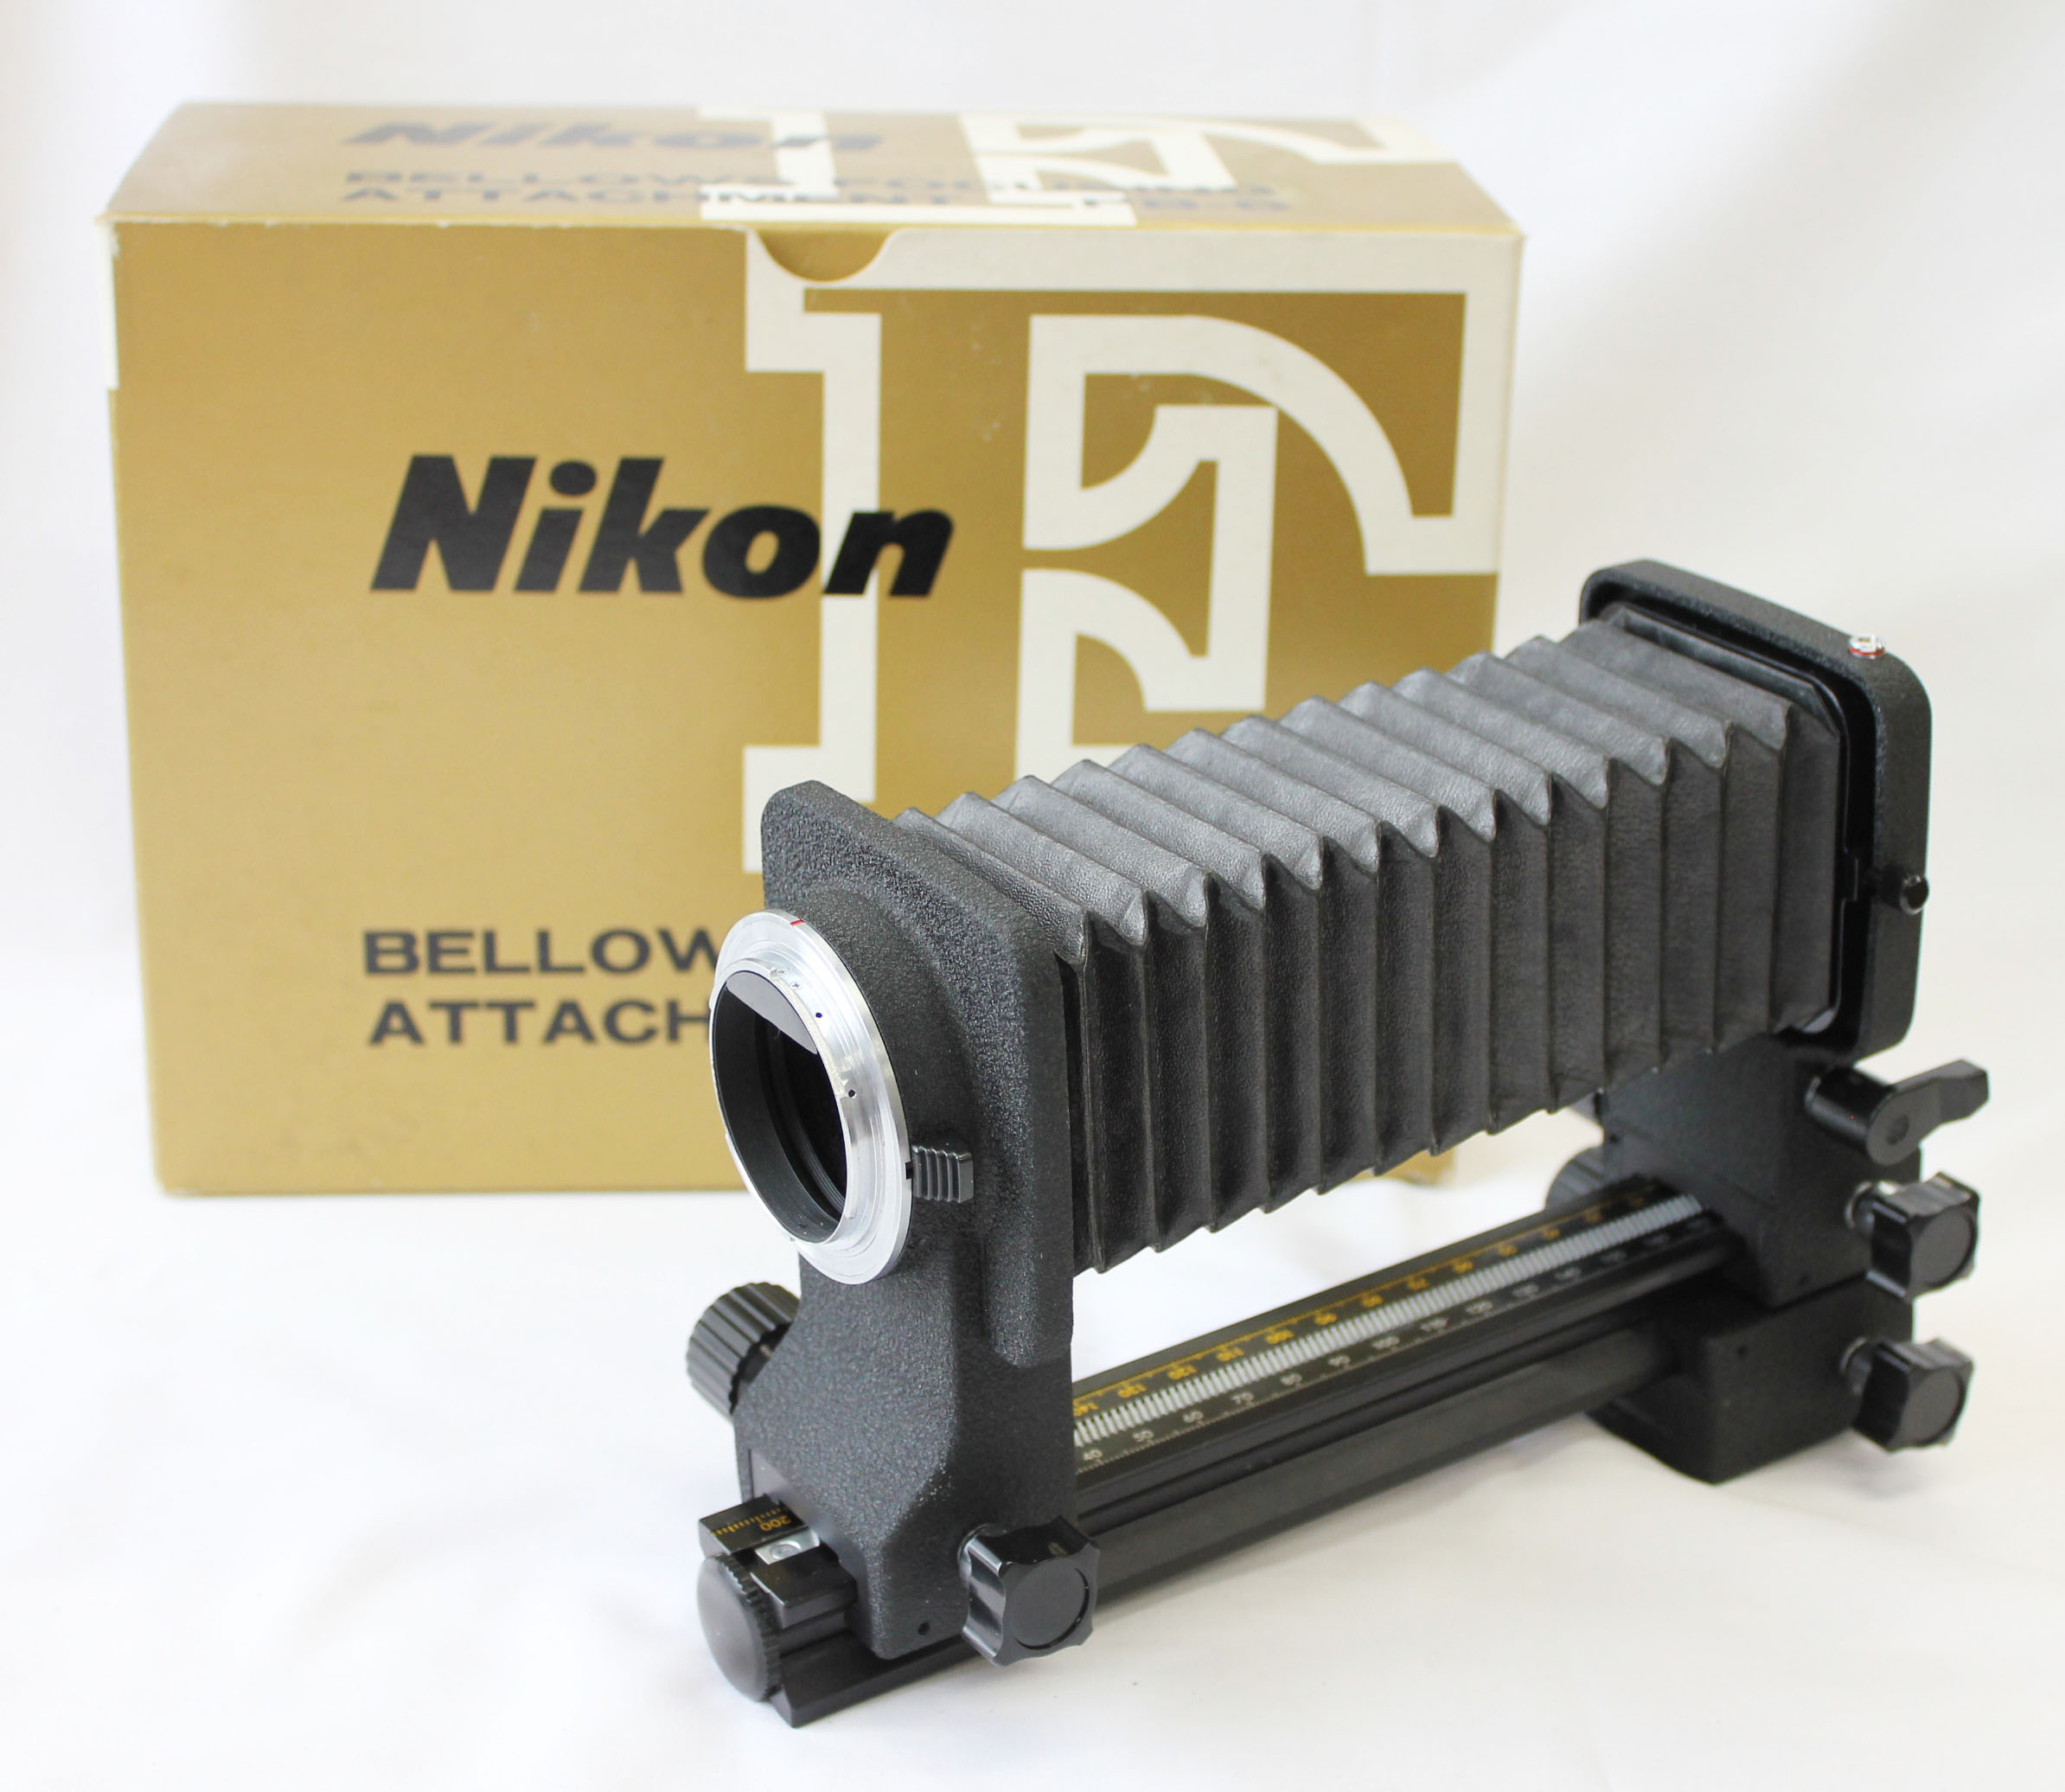 Japan Used Camera Shop | [Near Mint] Nikon Bellows Focusing Attachment PB-6 in Box from Japan